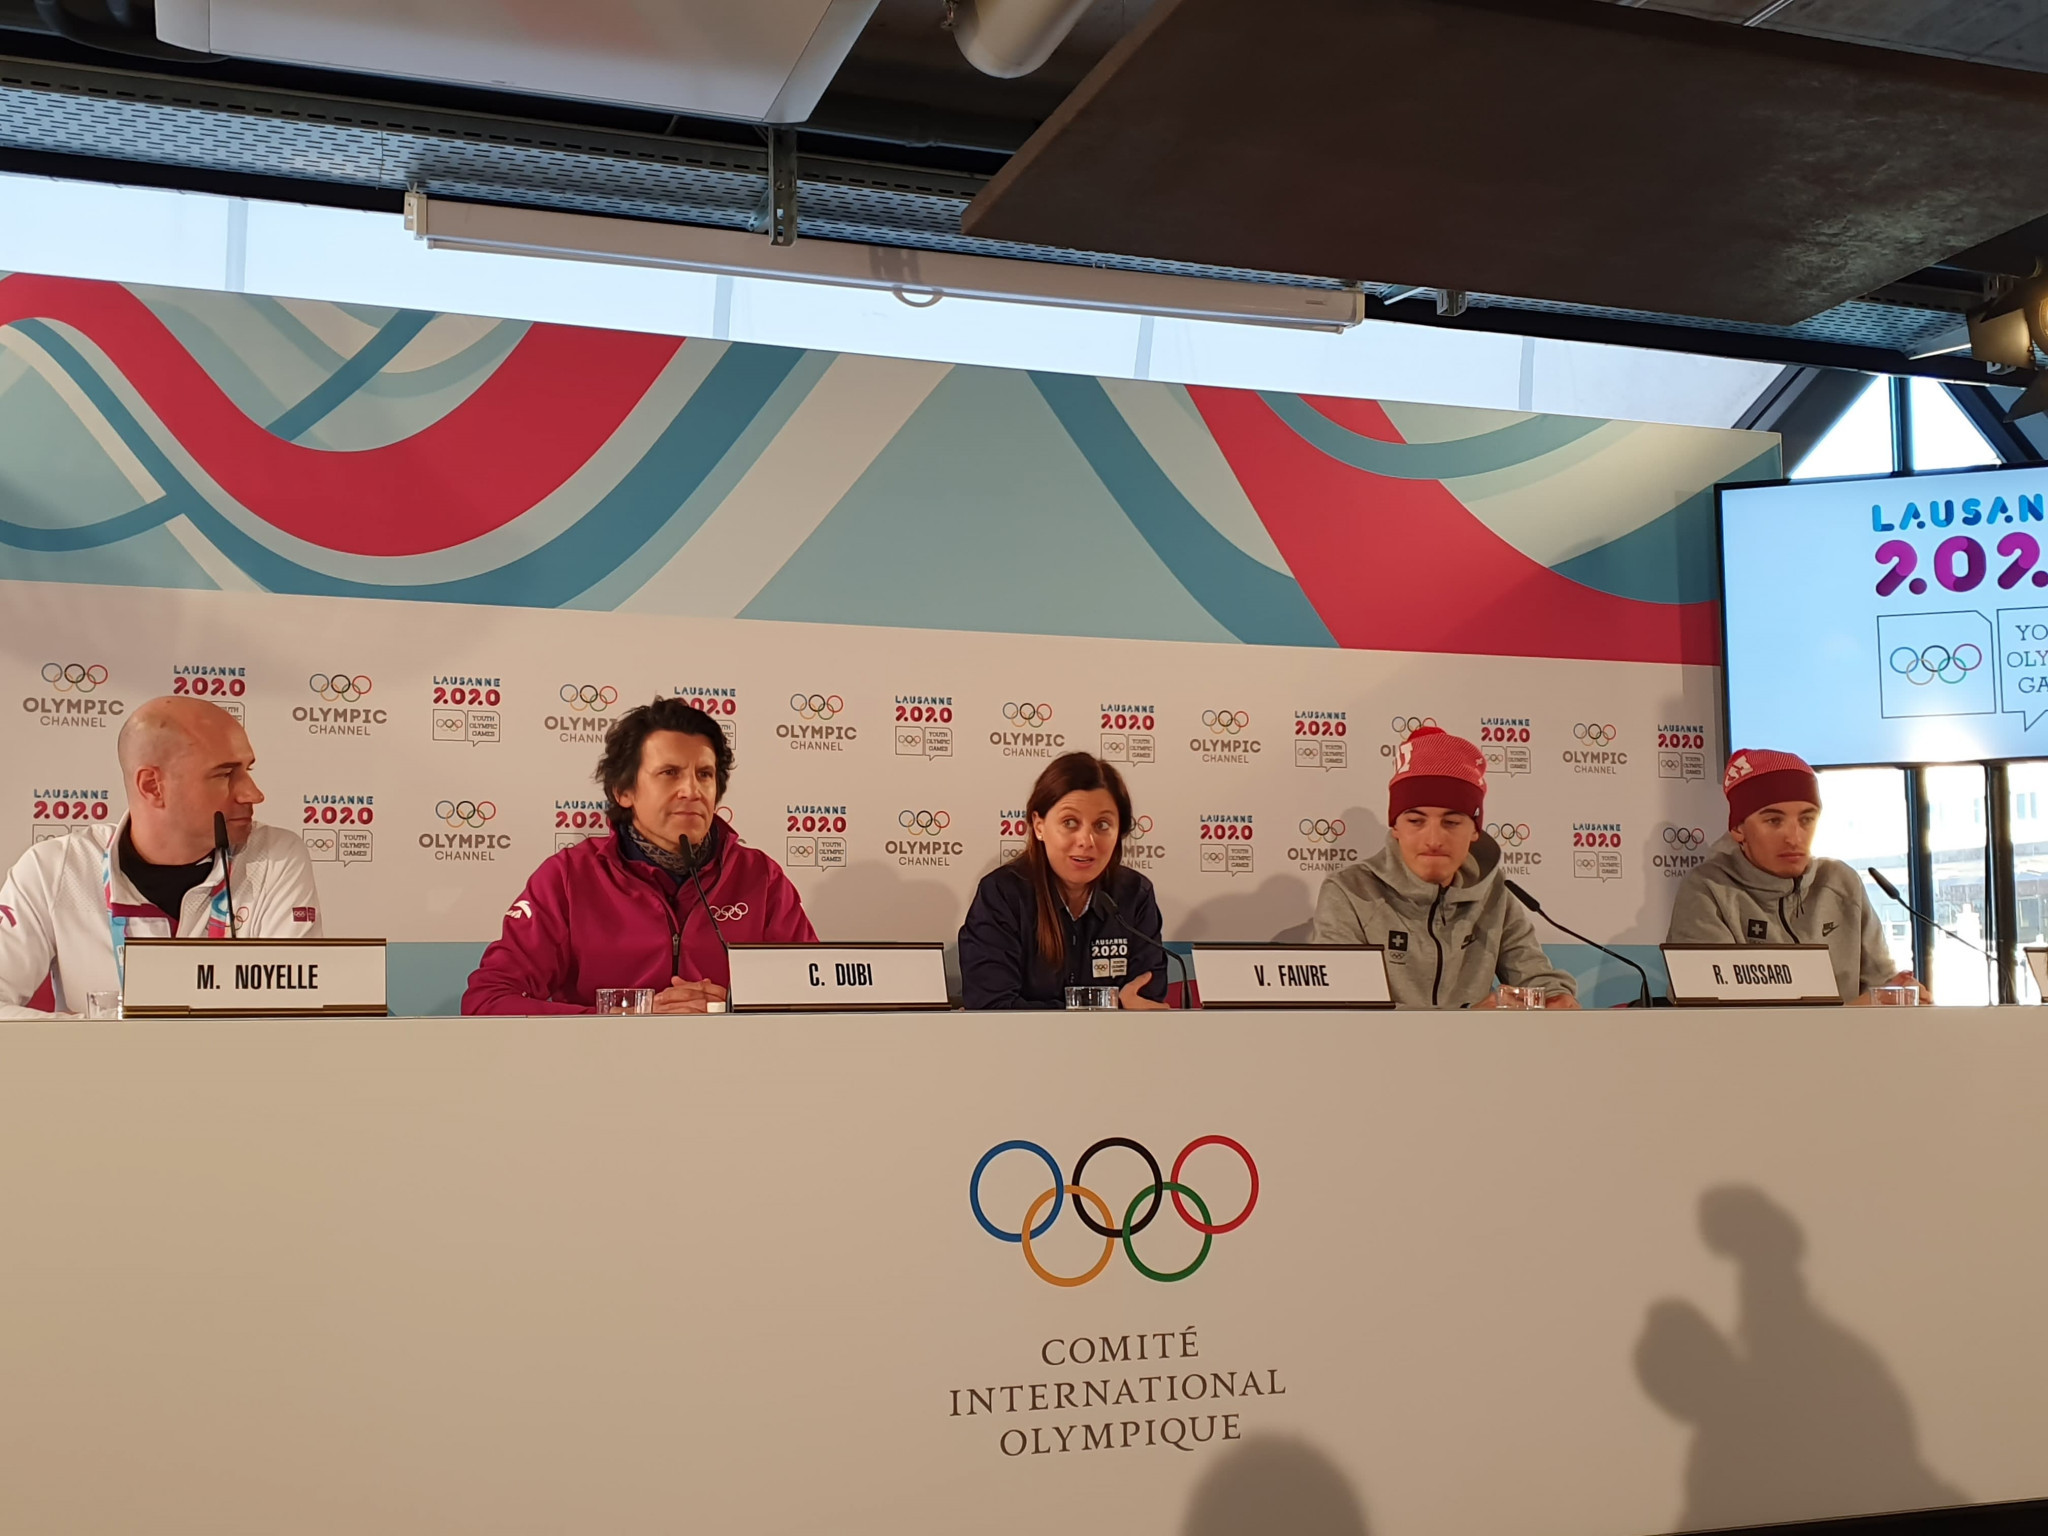 Christophe Dubi hopes Beijing 2022 can learn from Lausanne 2020 ©ITG